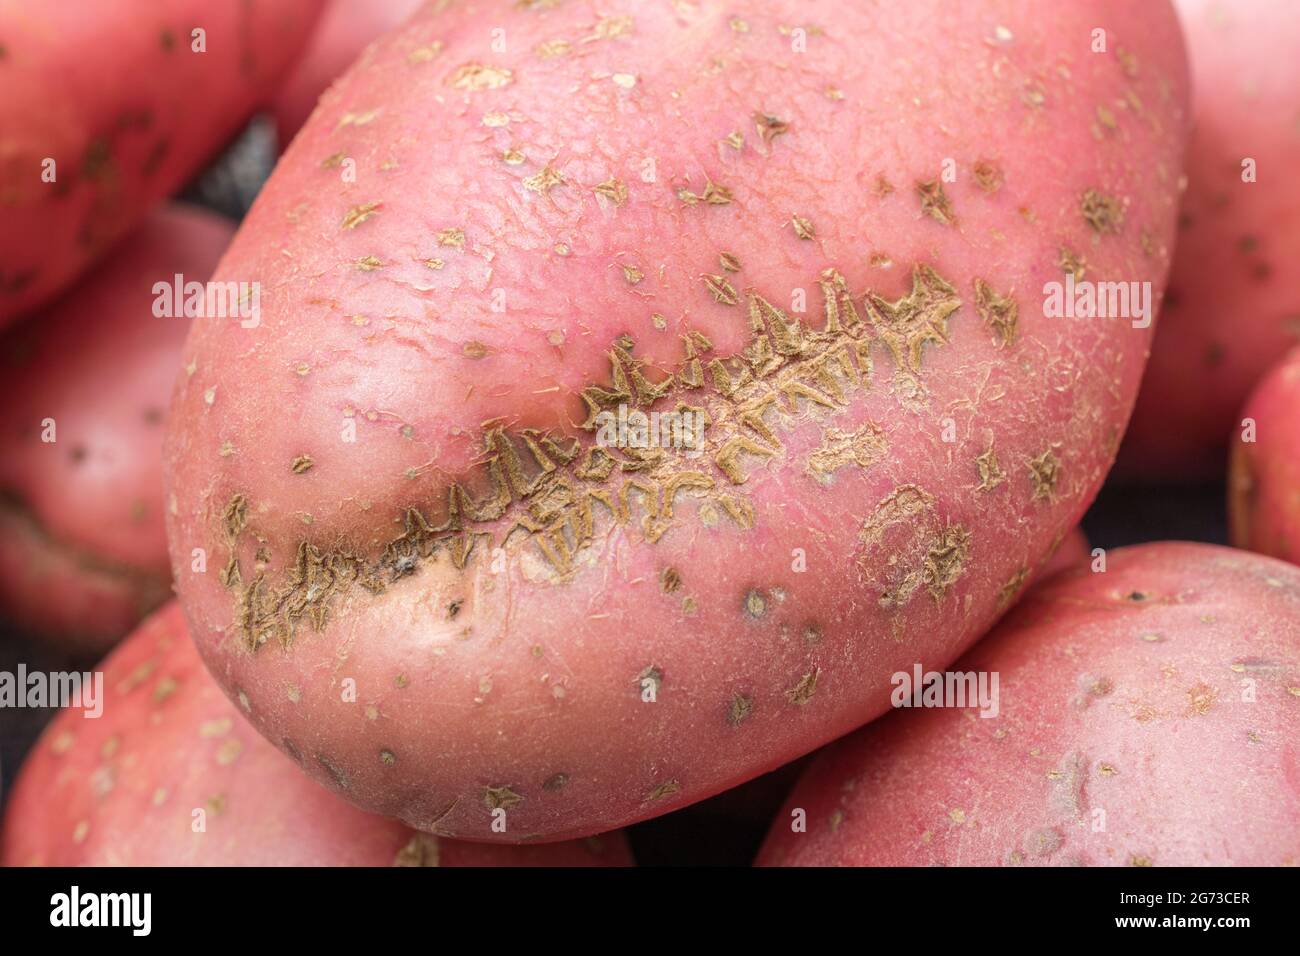 Red / russet potato grown in the UK. The potatoes have some disease present [which may be common scab, or perhaps powdery scab]. Stock Photo